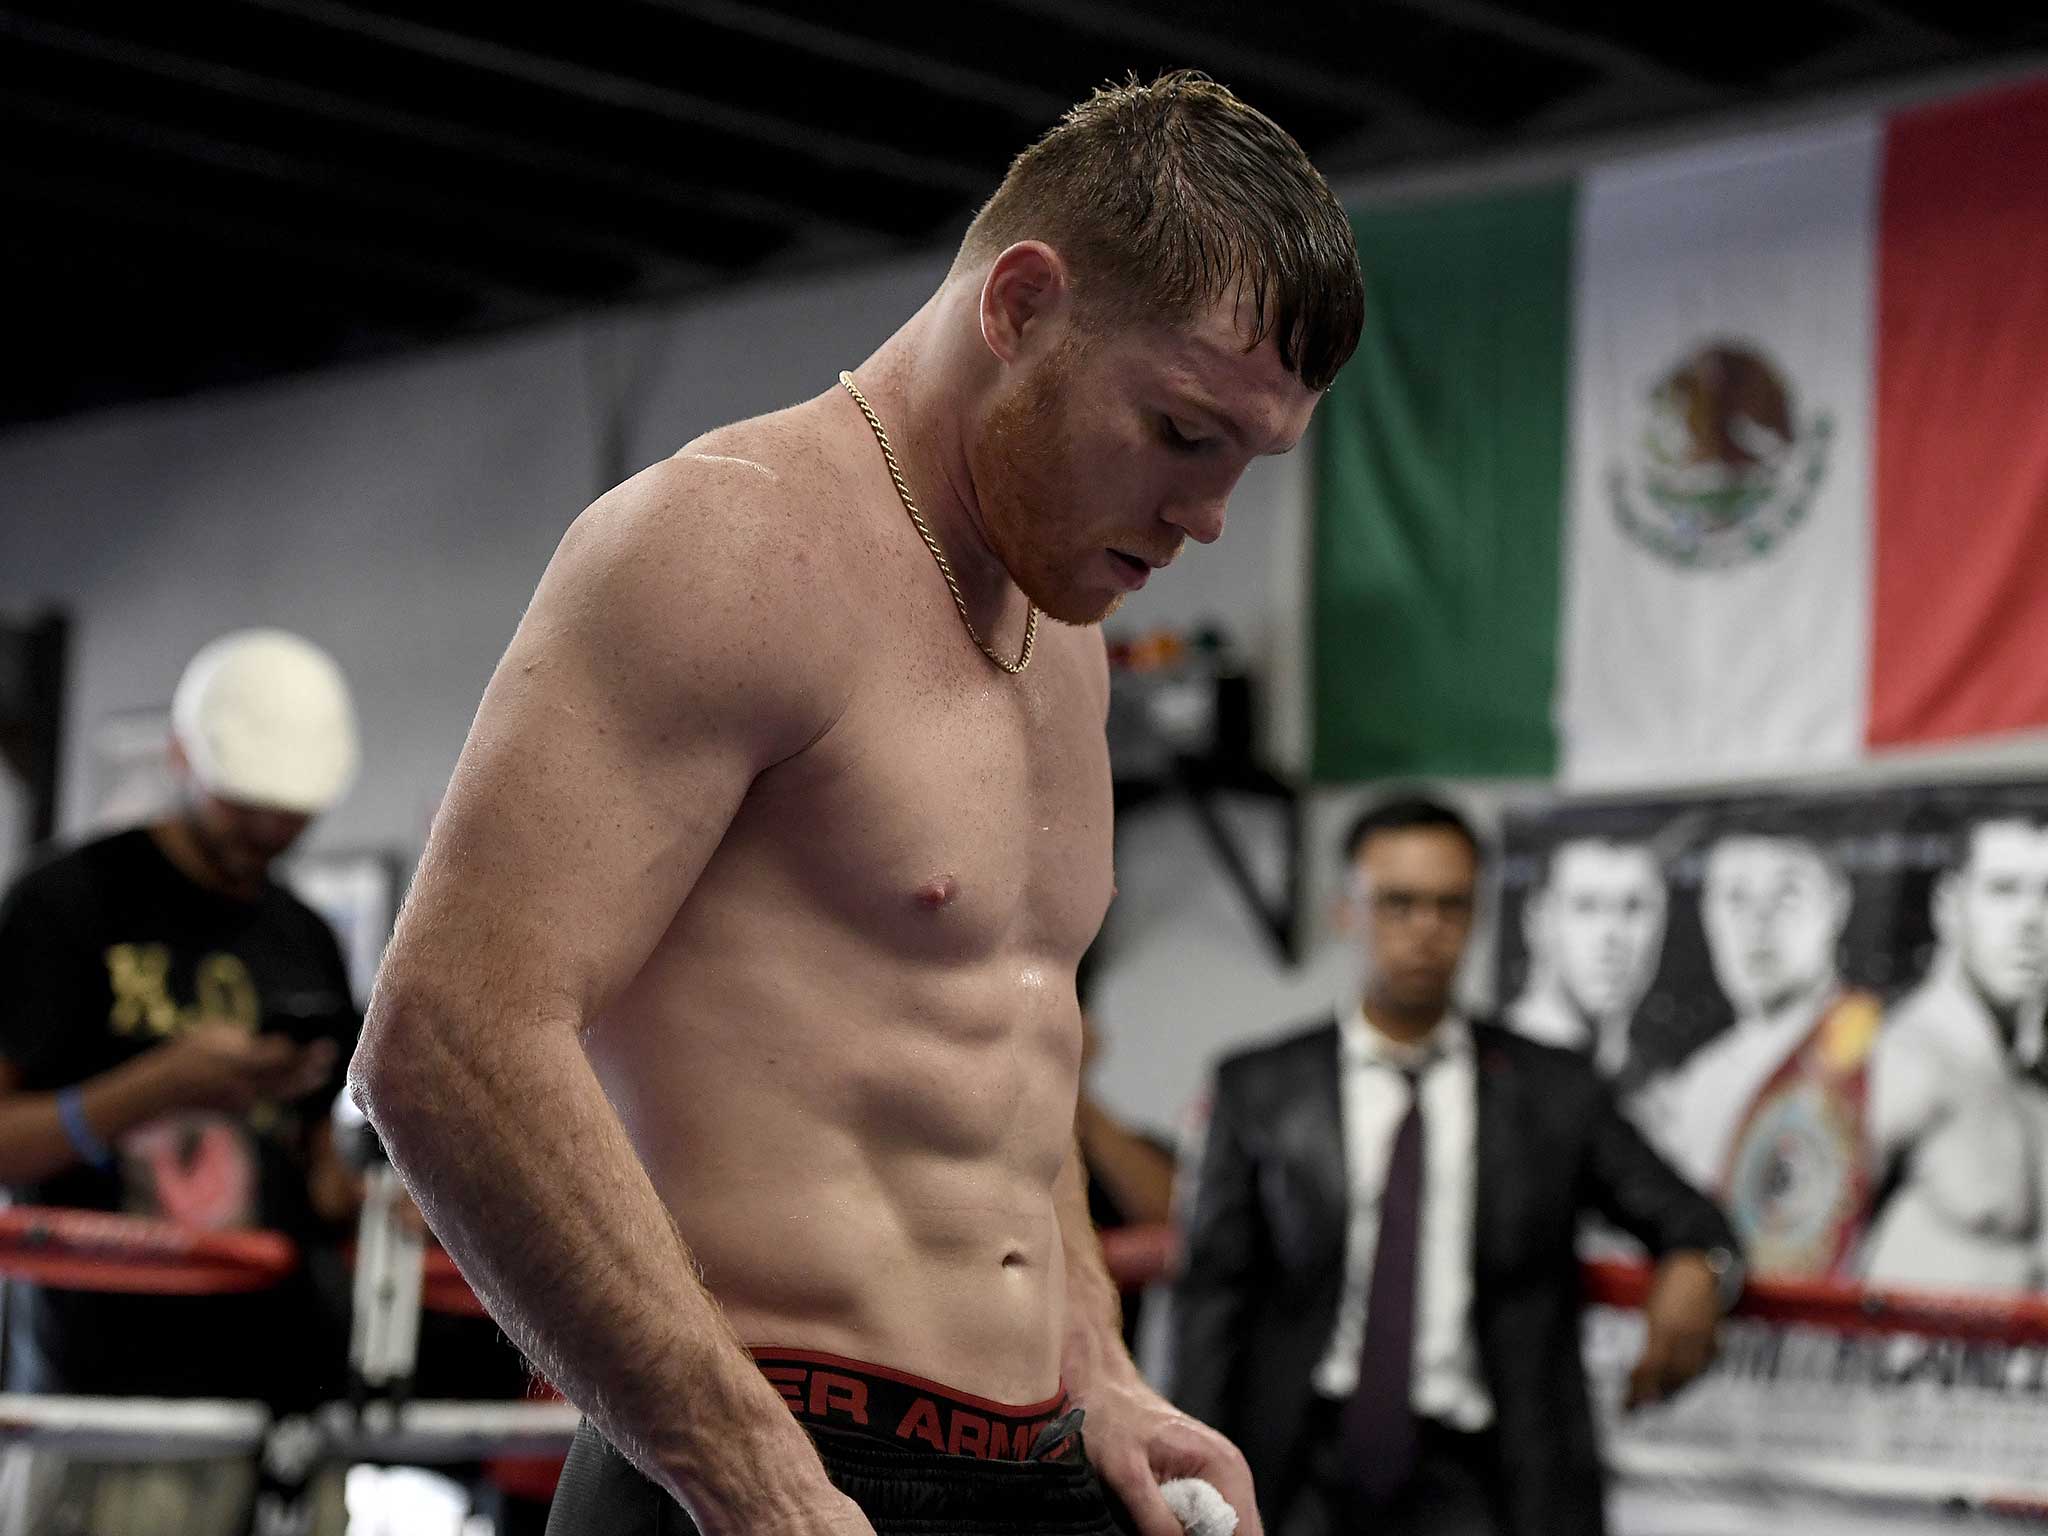 Saul Canelo Alvarez will be cheered on by the entirety of Mexico this weekend